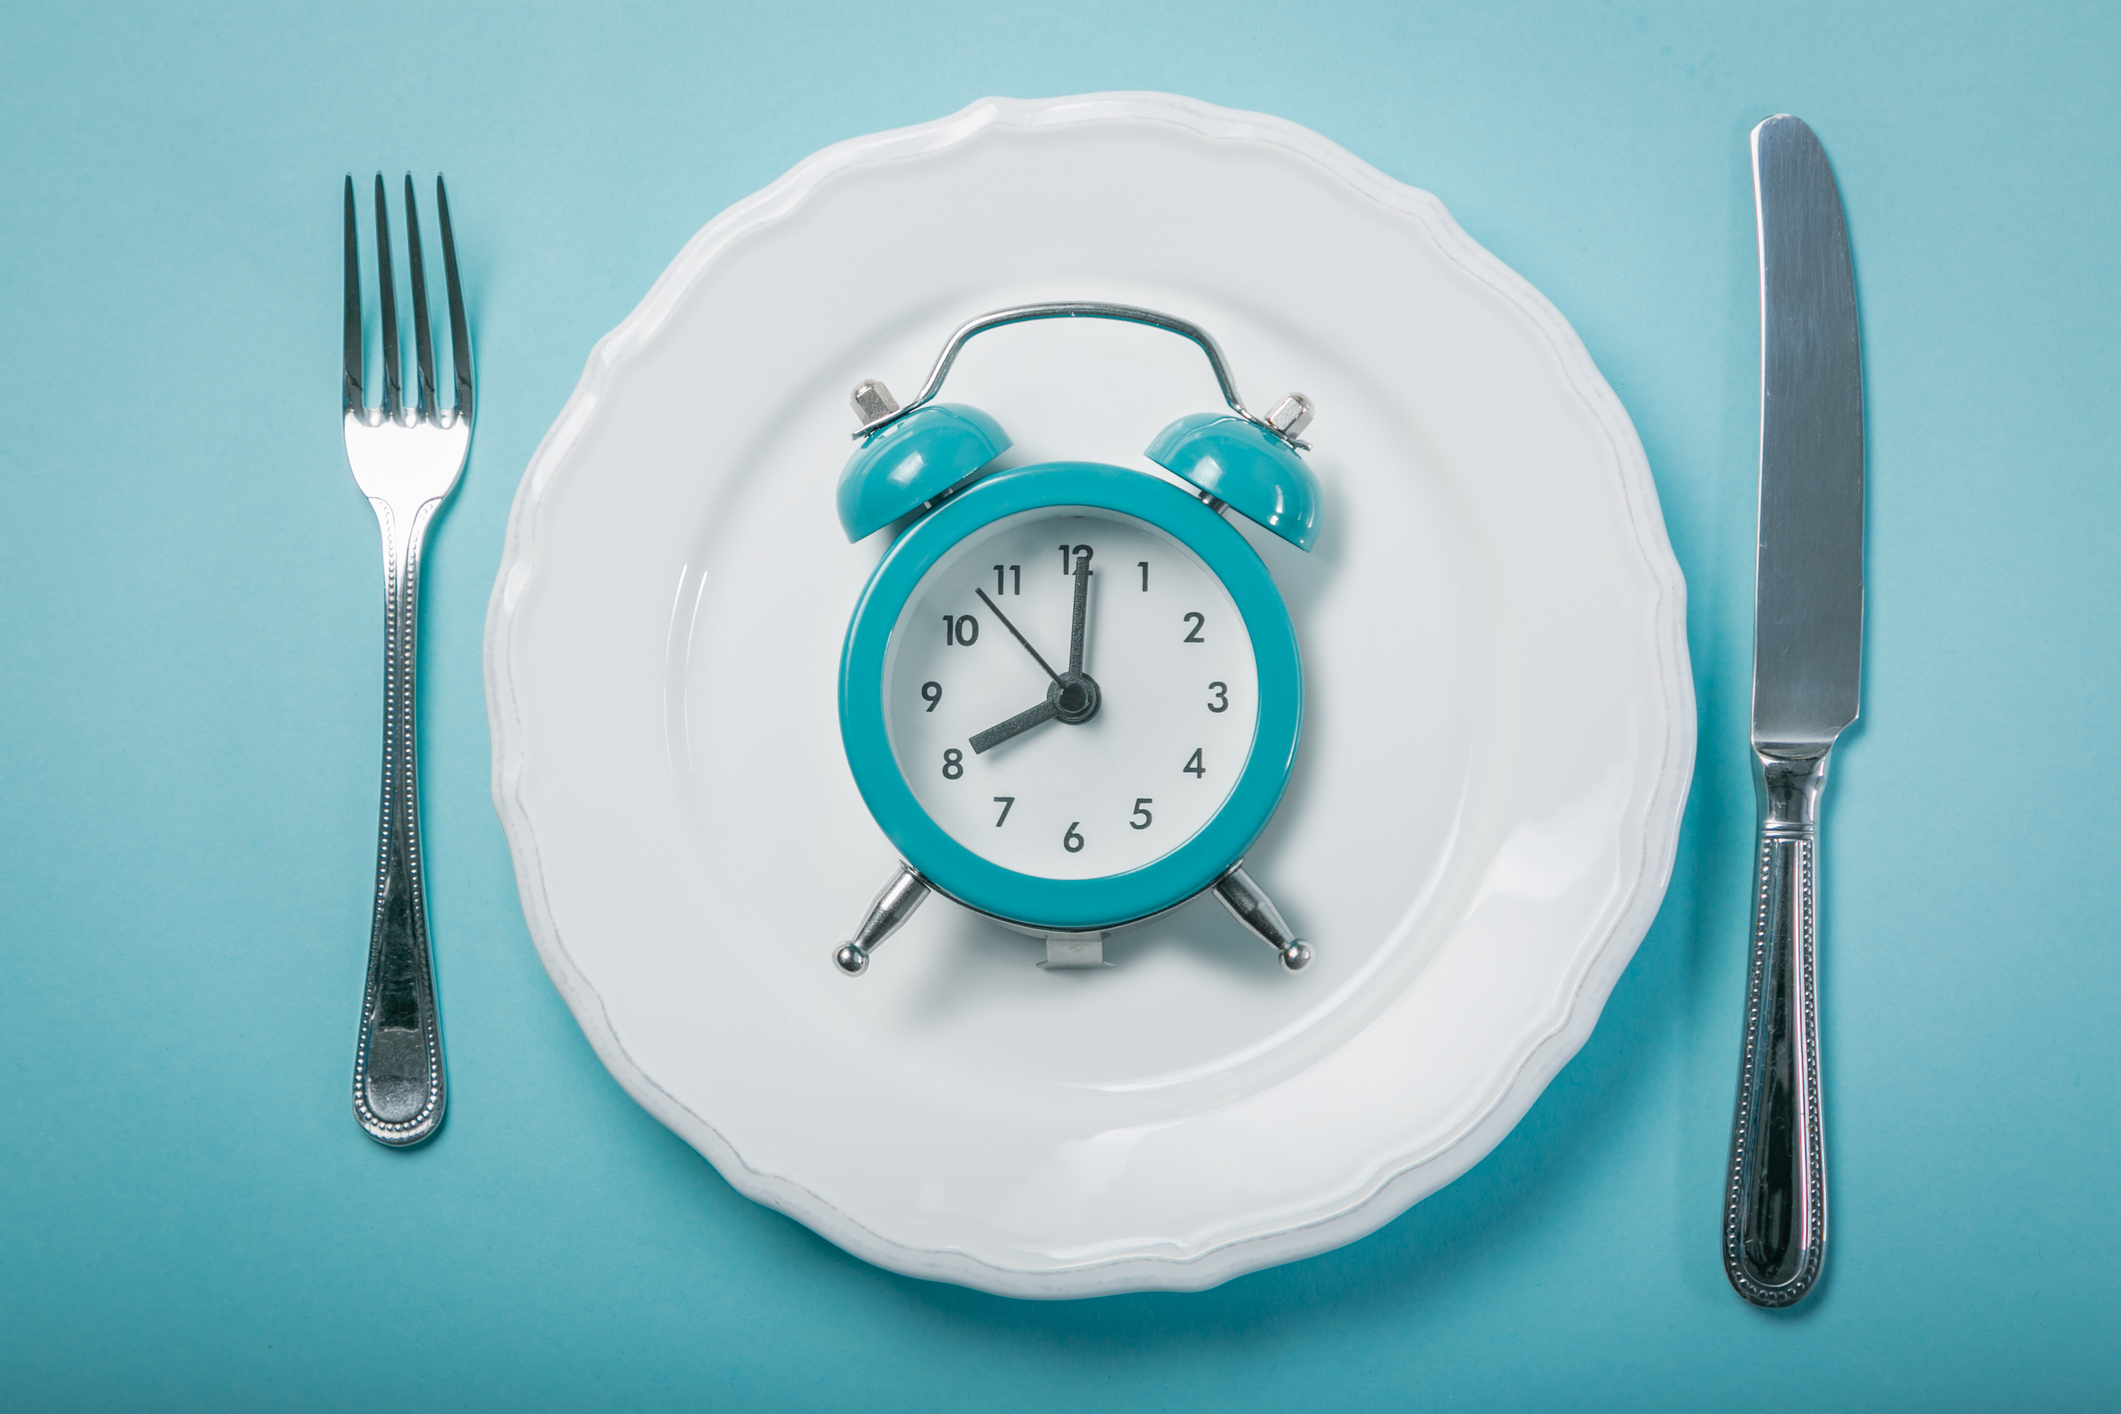 What’s The Right Way To Do Intermittent Fasting?